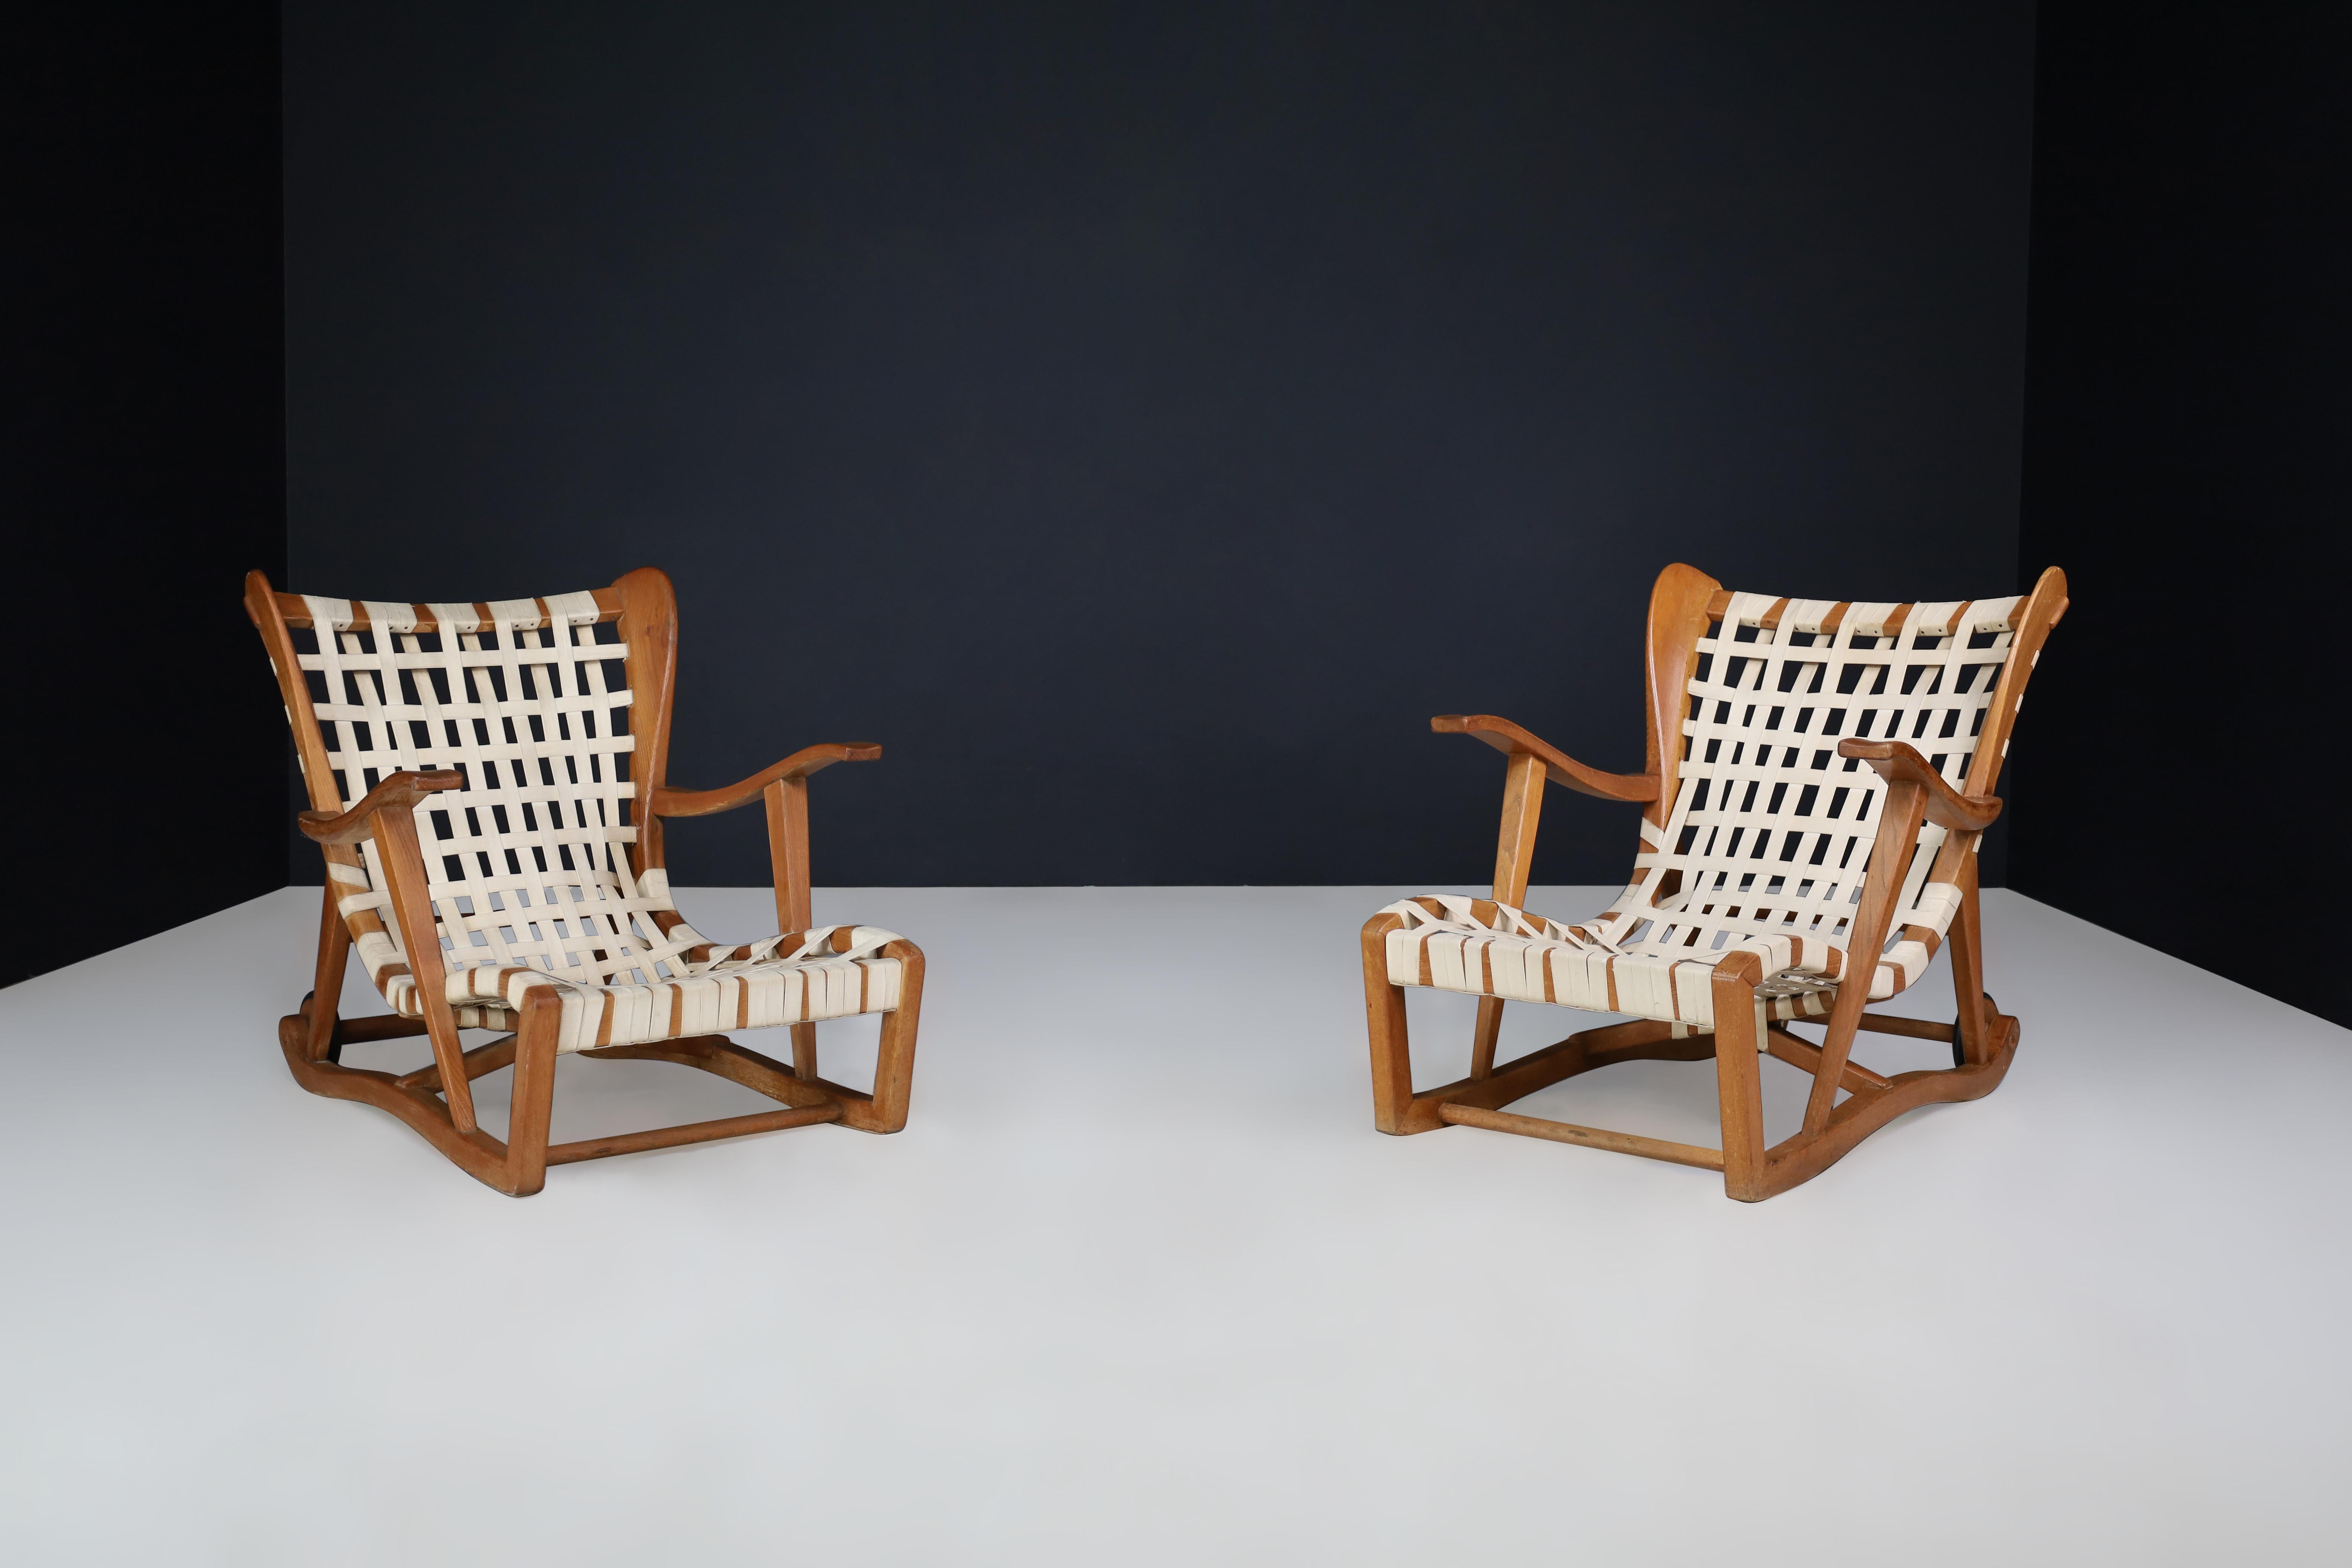 Sculptural Oak Lounge Chair by Guglielmo Pecorini, Italy, the 1950s For Sale 11